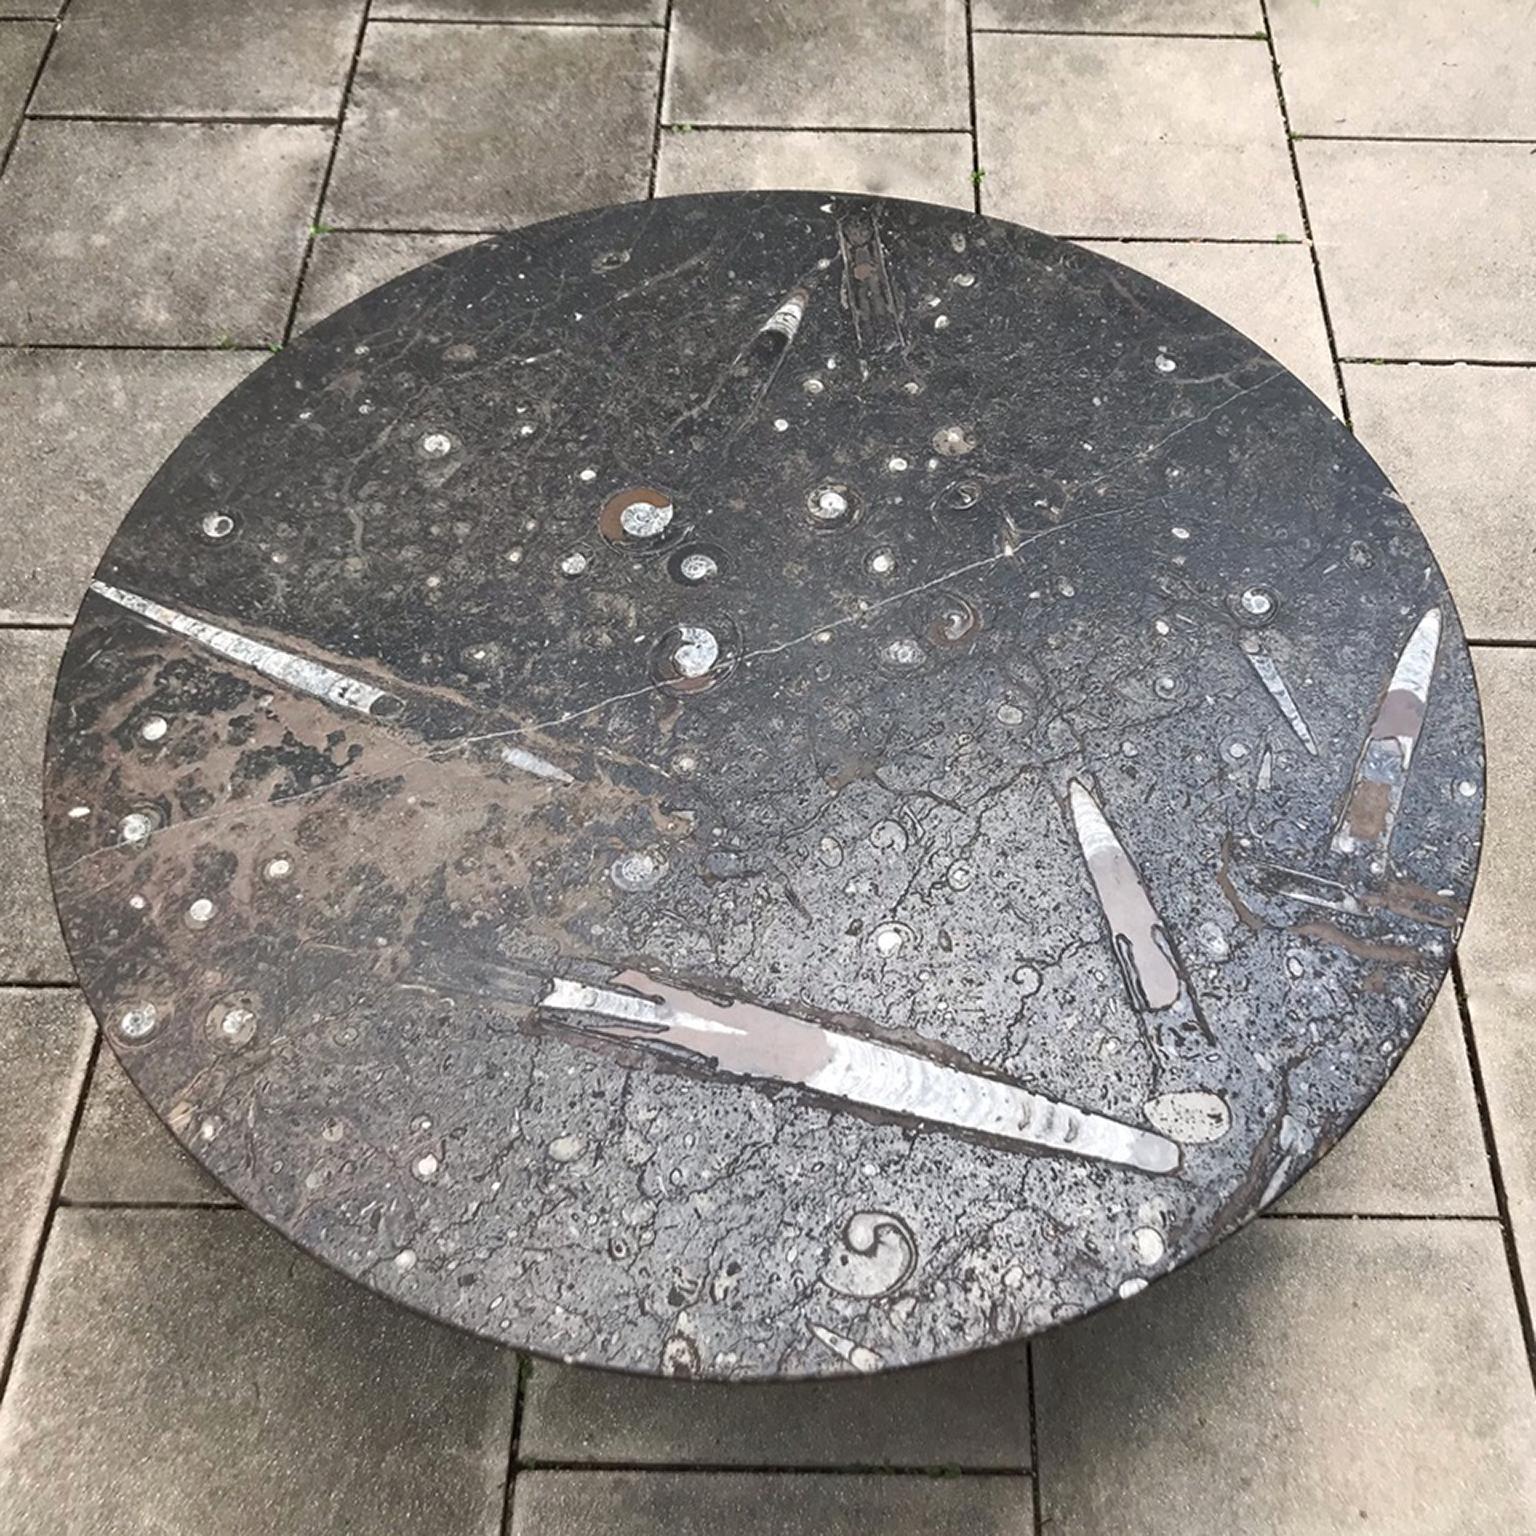 The famous german Artist Heinz Lilienthal deigned this eye-catching coffee table in 1970. The unique feature of this table is the large round stone top that has ammonite and fossil inlays. This creates a unique appearance that keeps the table